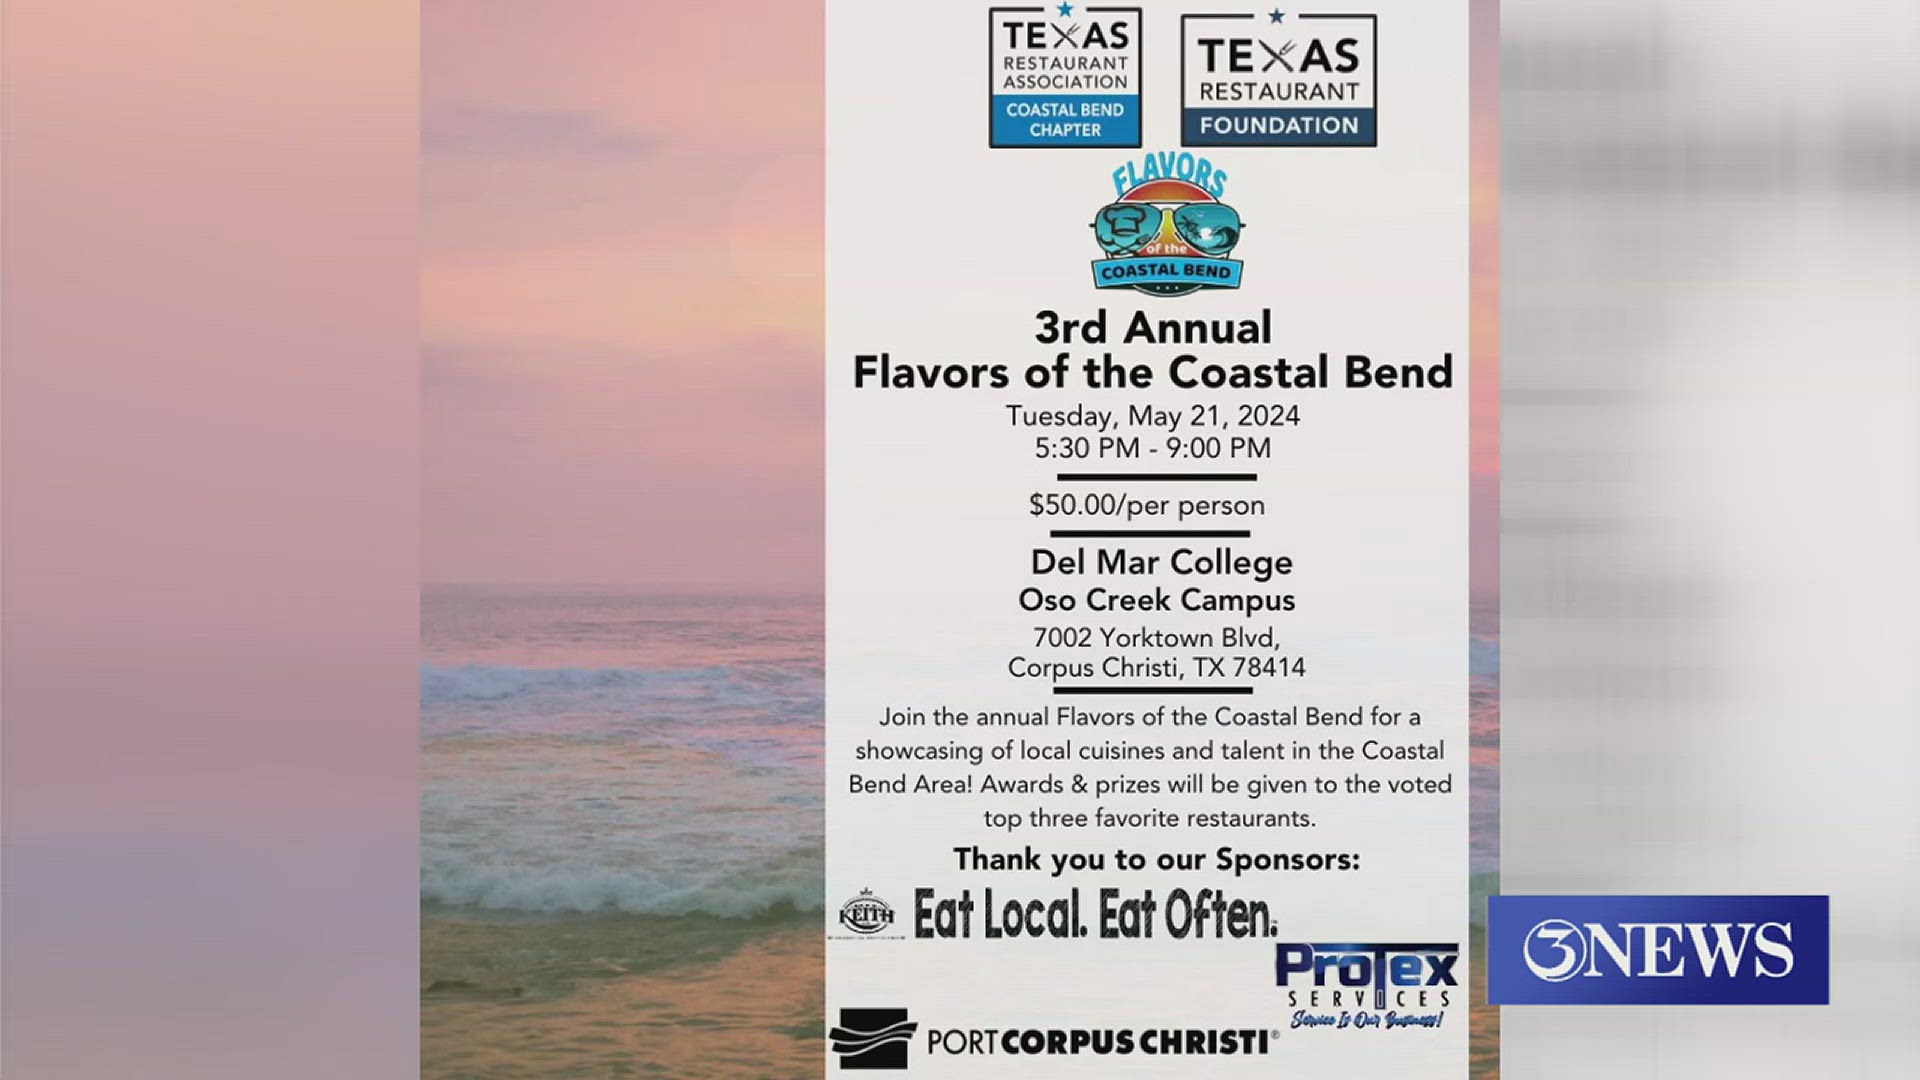 Money raised from the event will go toward funding scholarships for coastal bend high schools and college culinary arts students.